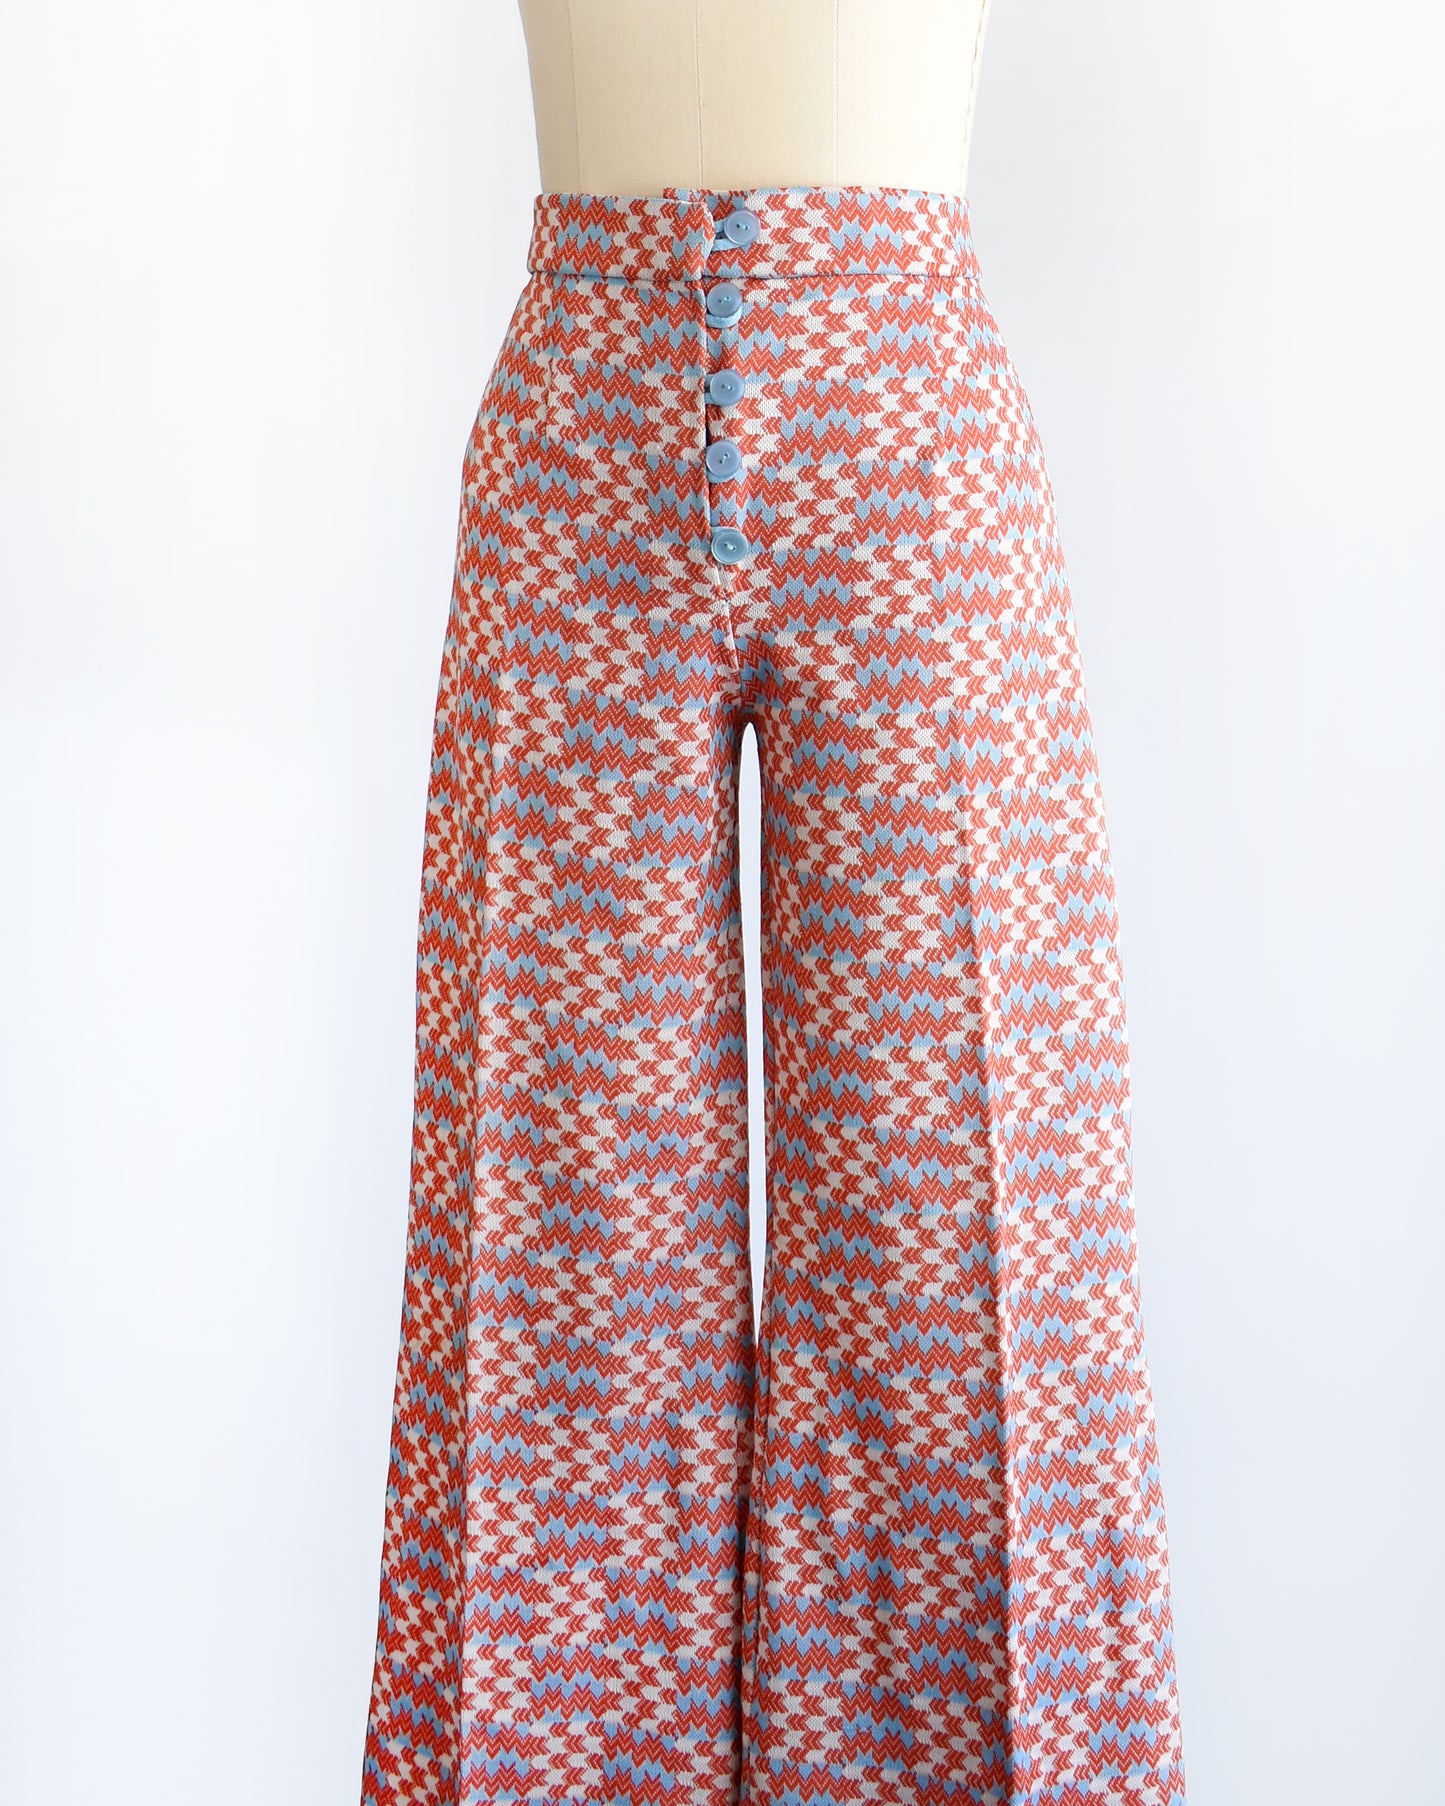 side front view of a vintage 1970s wide leg pants feature a vibrant print with dark orange, white, and light blue arrows pointing in various directions down the legs. There are 5 buttons on the front of the pants